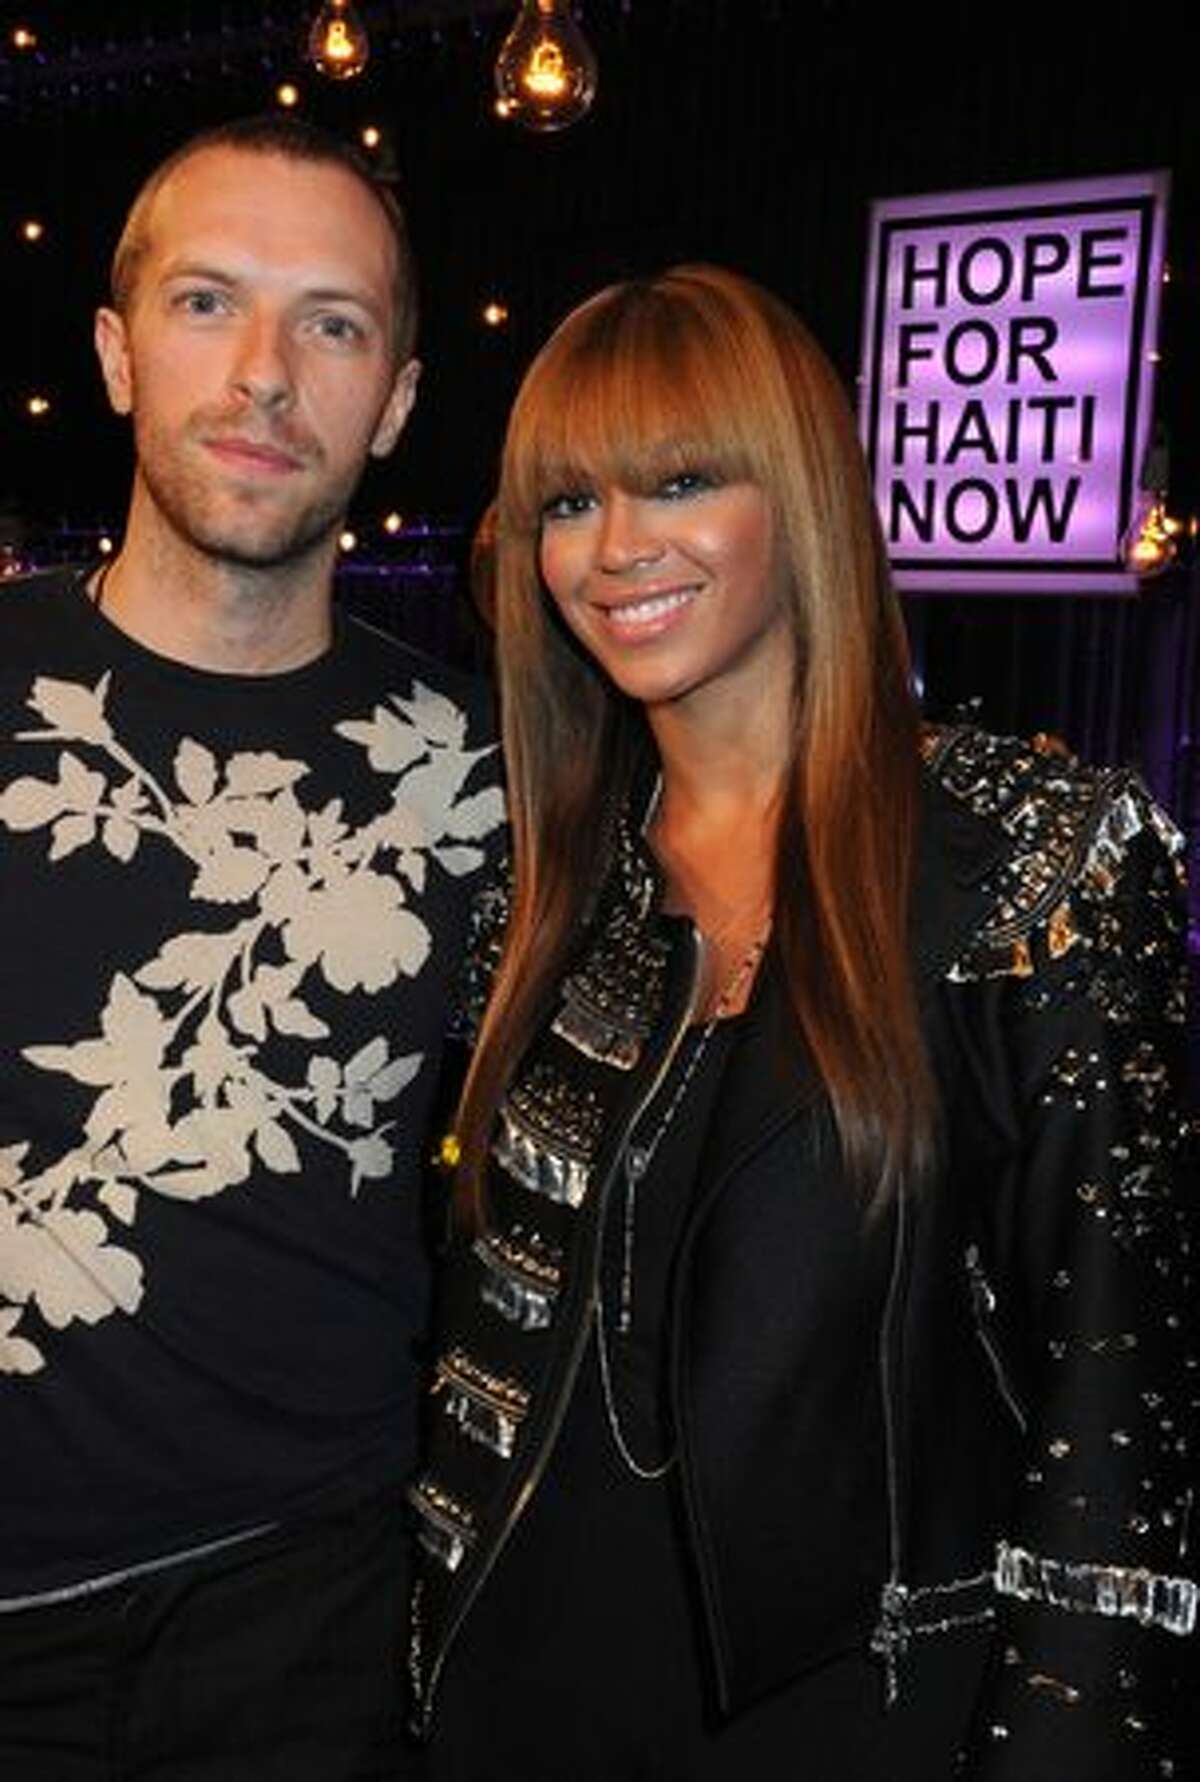 Chris Martin and Beyonce Knowles attend the Hope For Haiti Now concert in London.